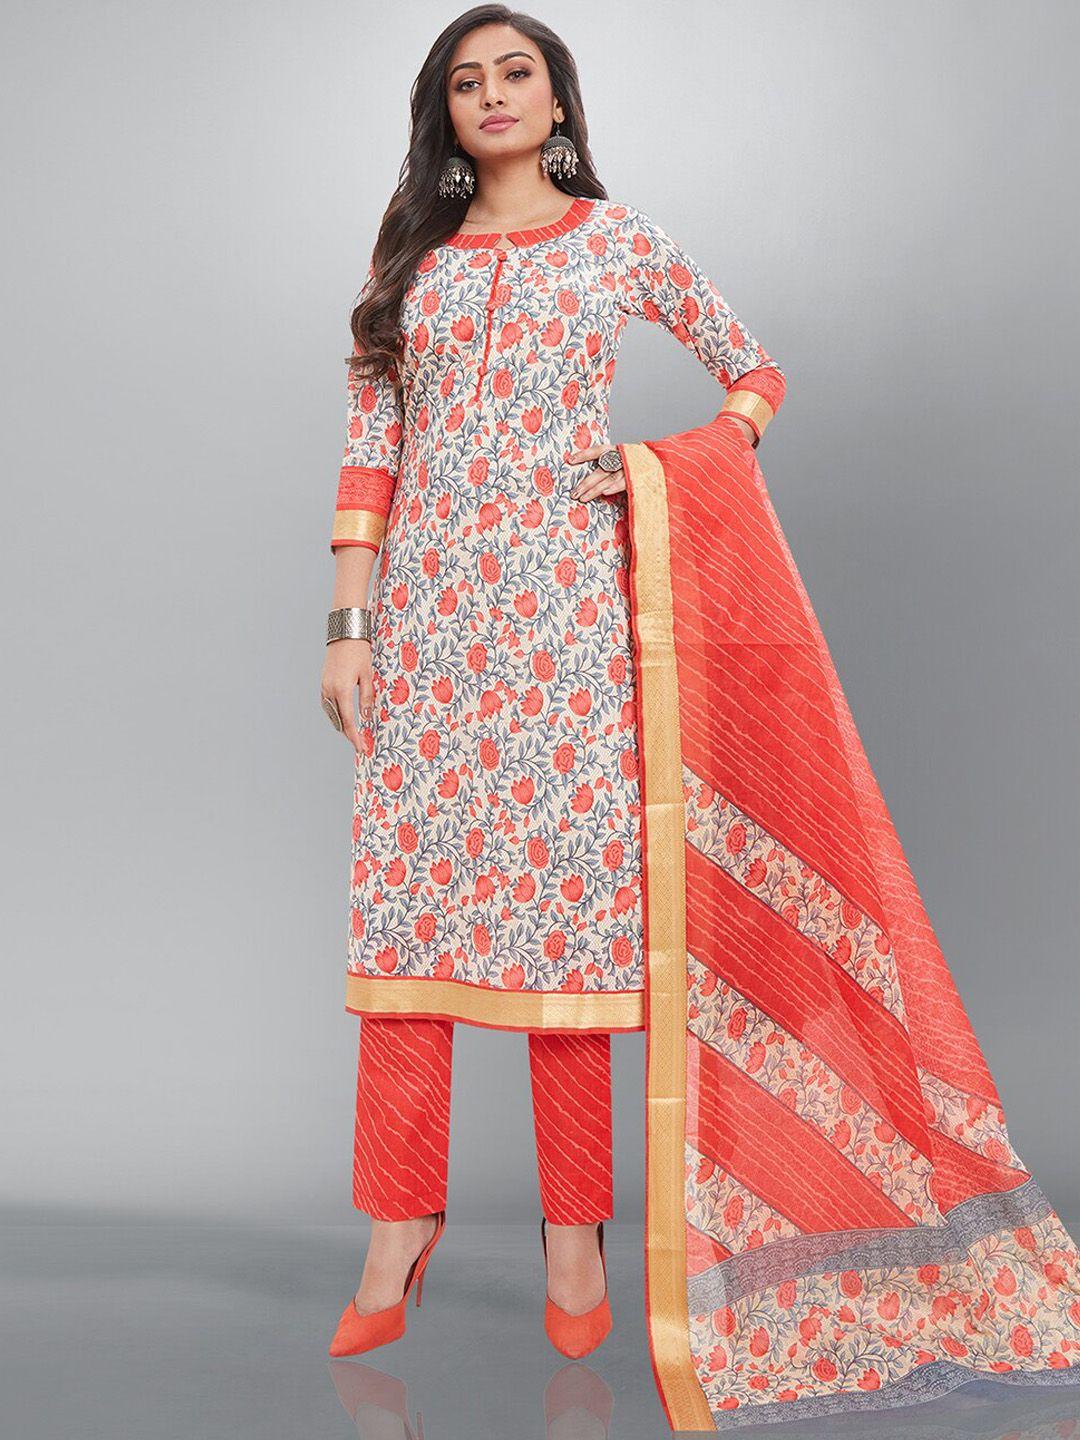 jevi prints floral printed pure cotton kurta with trousers & with dupatta